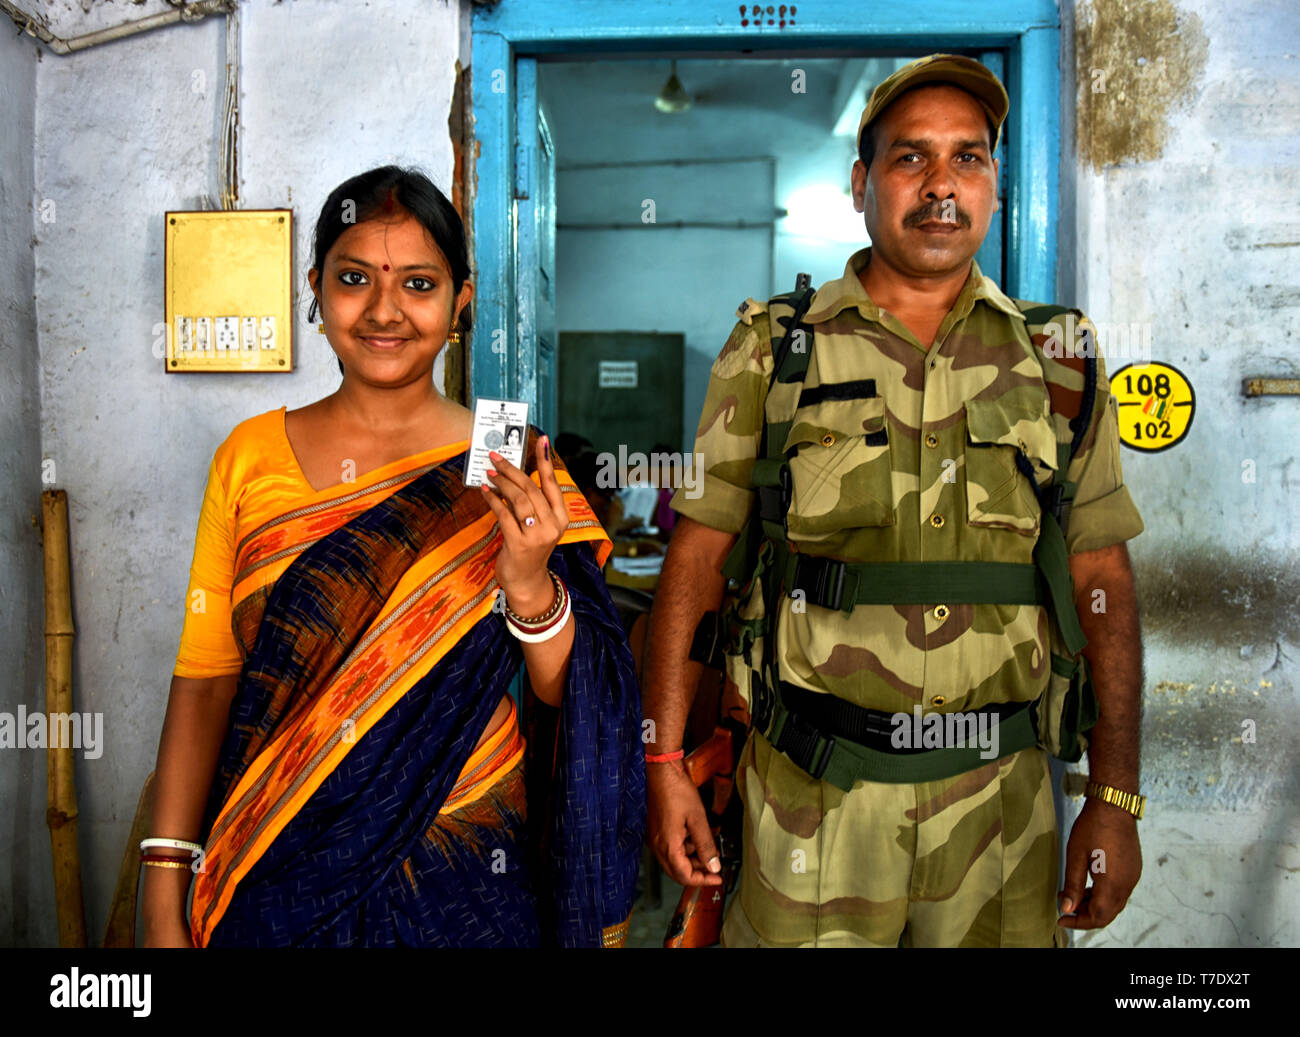 Barrackpore, WEST BENGAL, India. 6th May, 2019. A Young woman seen showing her ink marked finger next to an armed soldier after casting the vote at a polling station during the 5th Phase of General Elections of India. Credit: Avishek Das/SOPA Images/ZUMA Wire/Alamy Live News Stock Photo